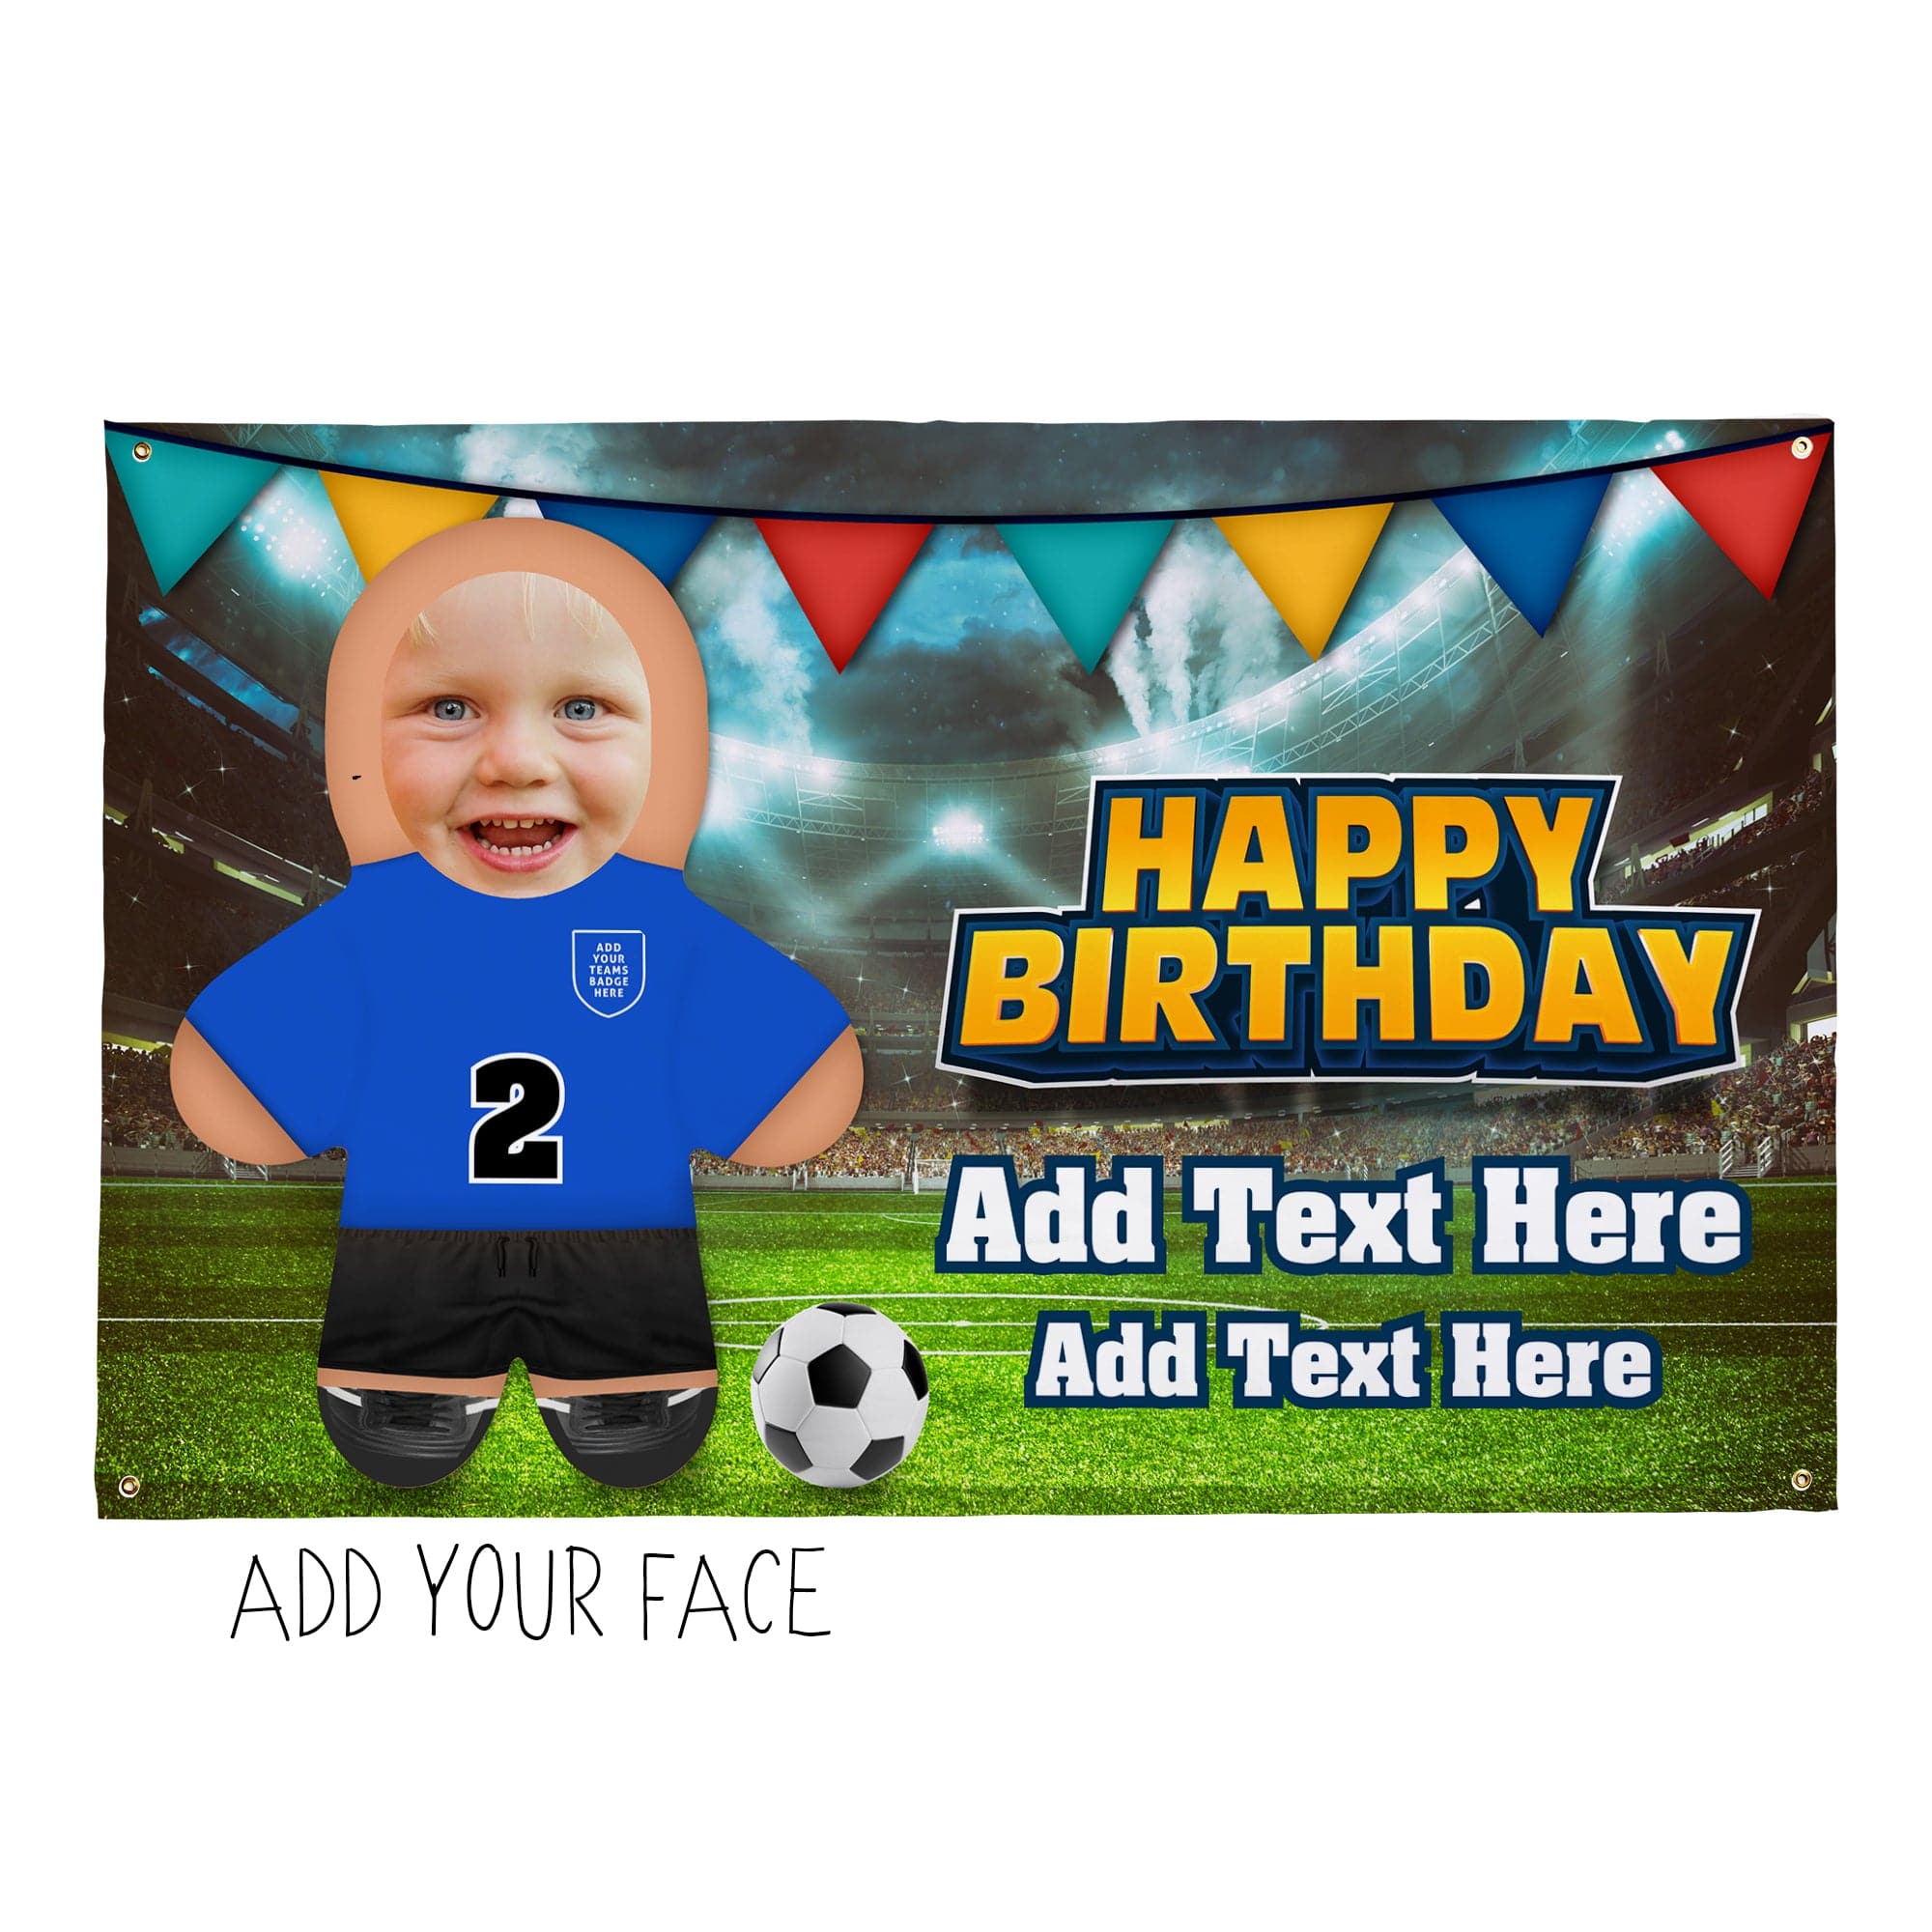 Football - Choose Your Colour Shirt - Mini Me World - Personalised 5FT X 3FT Banner